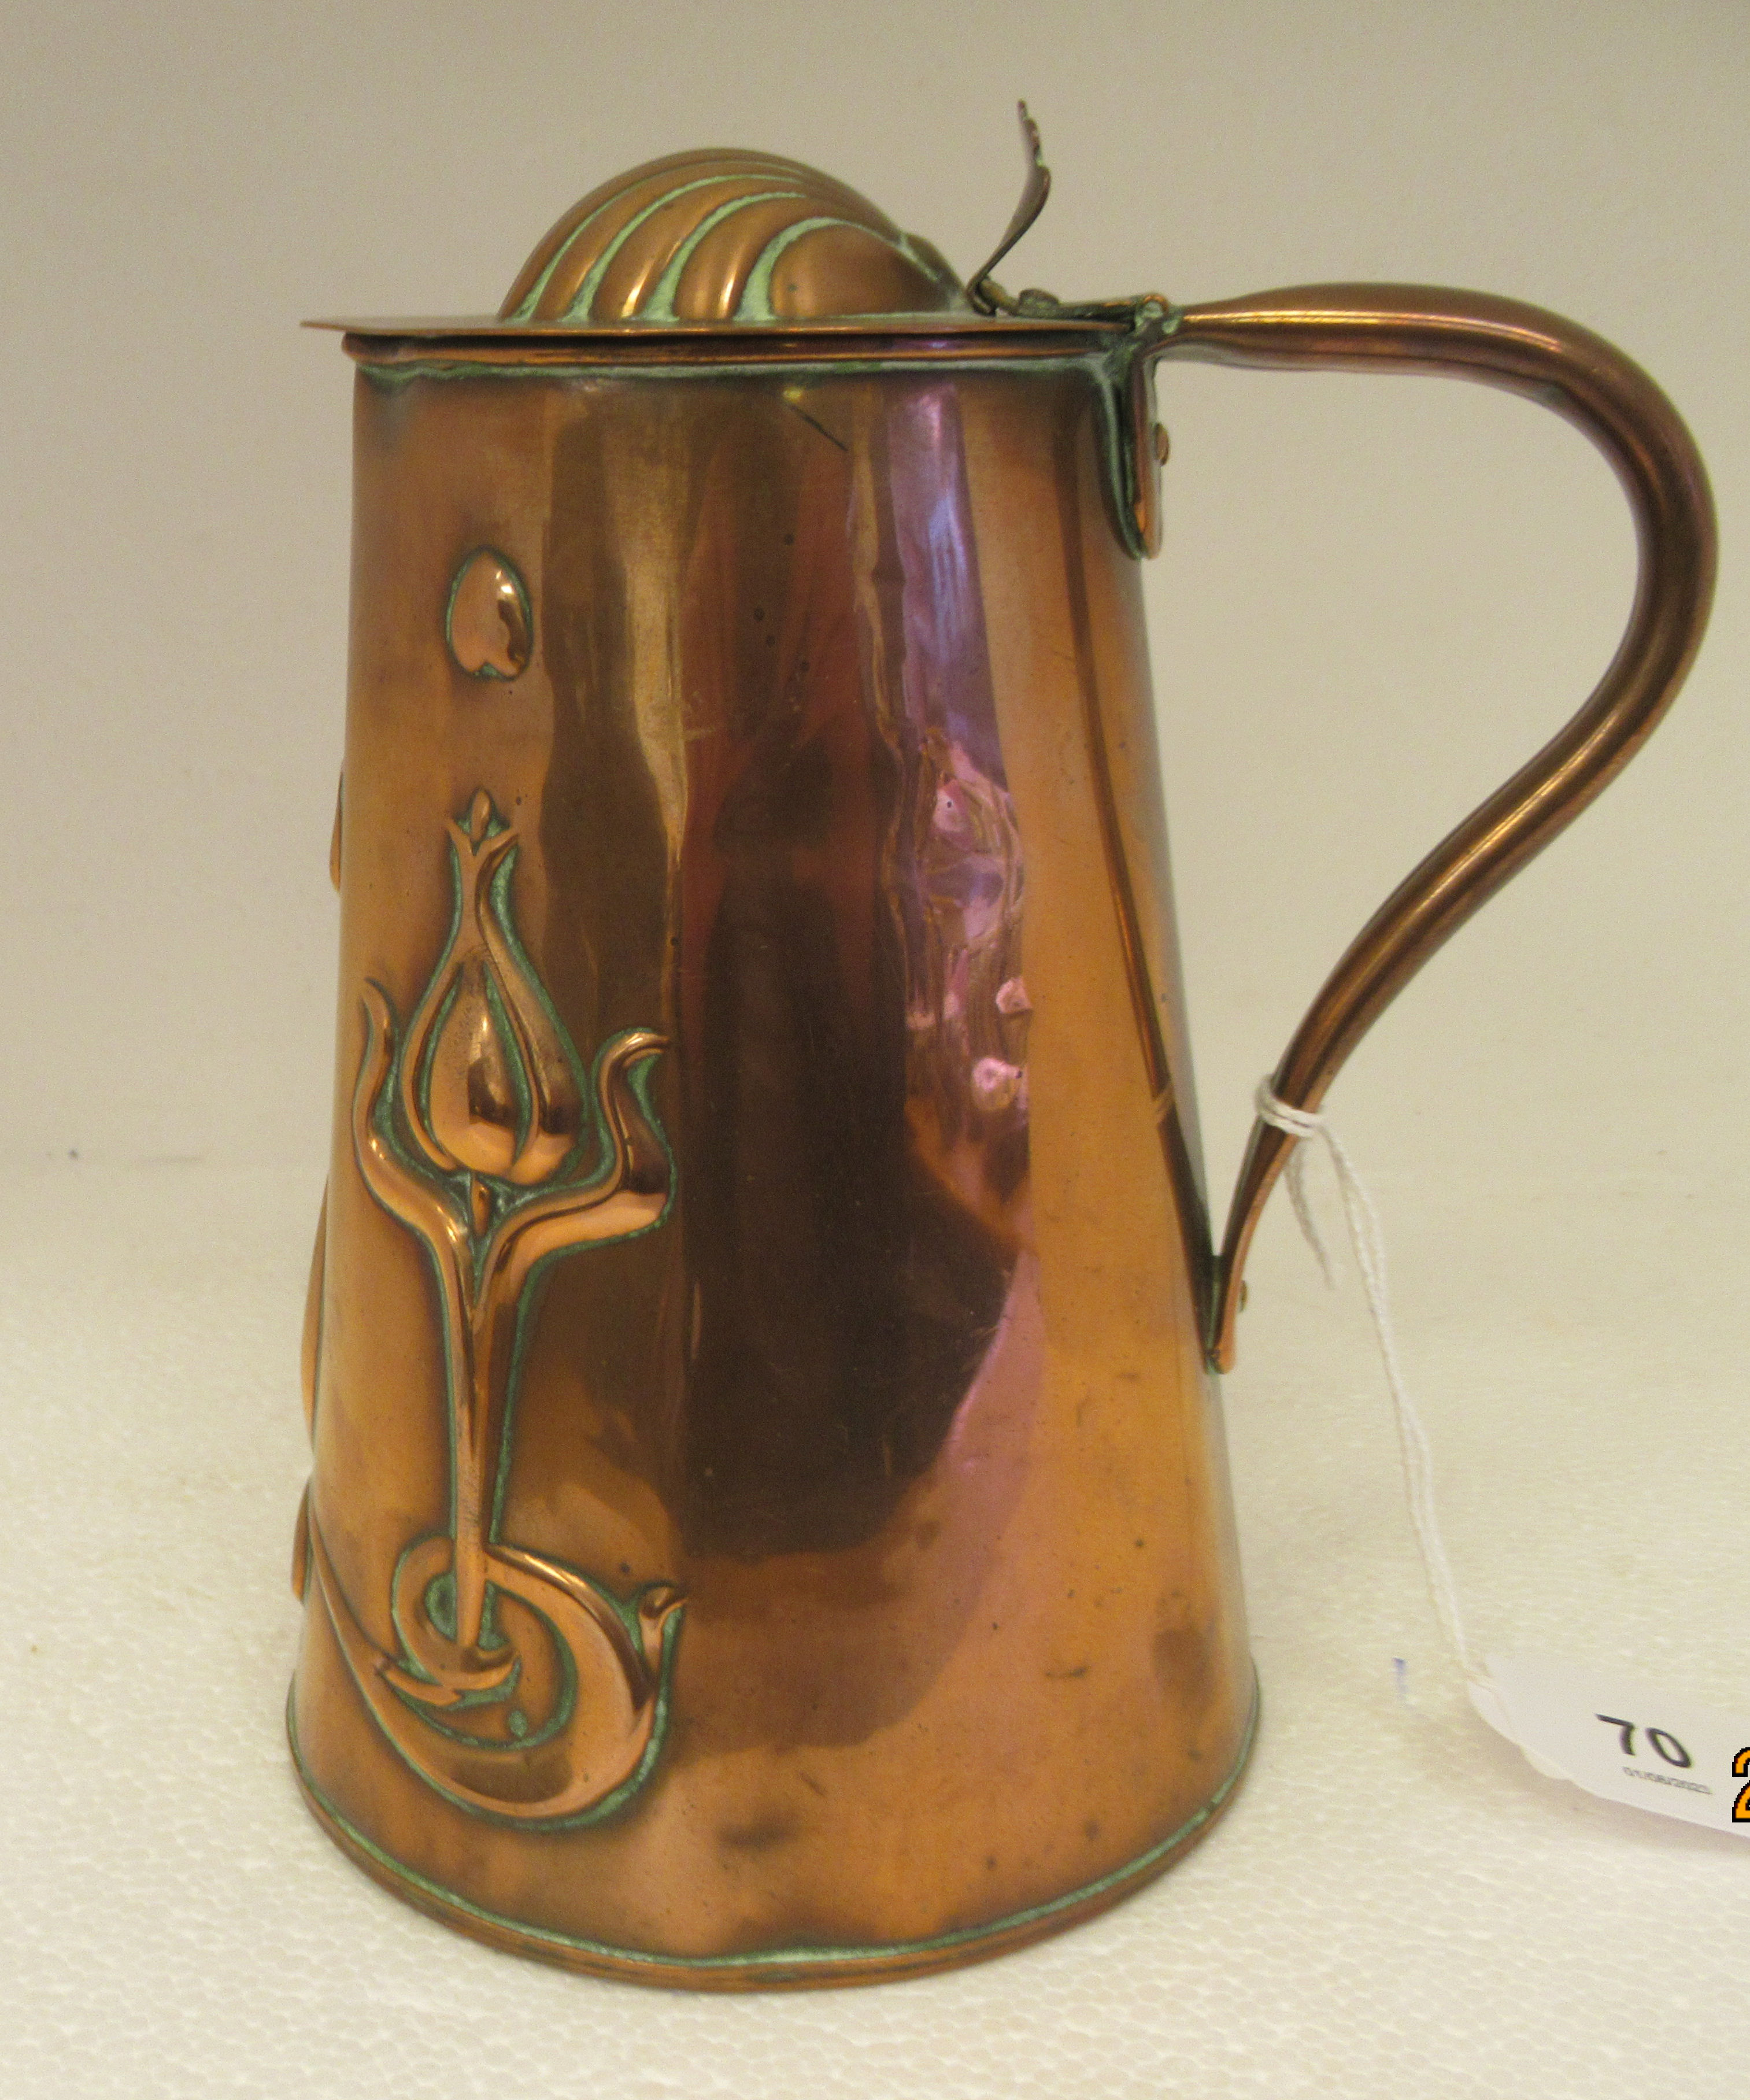 An early 20thC JS&S copper milk jug of tapered, cylindrical form, having a hollow loop handle and